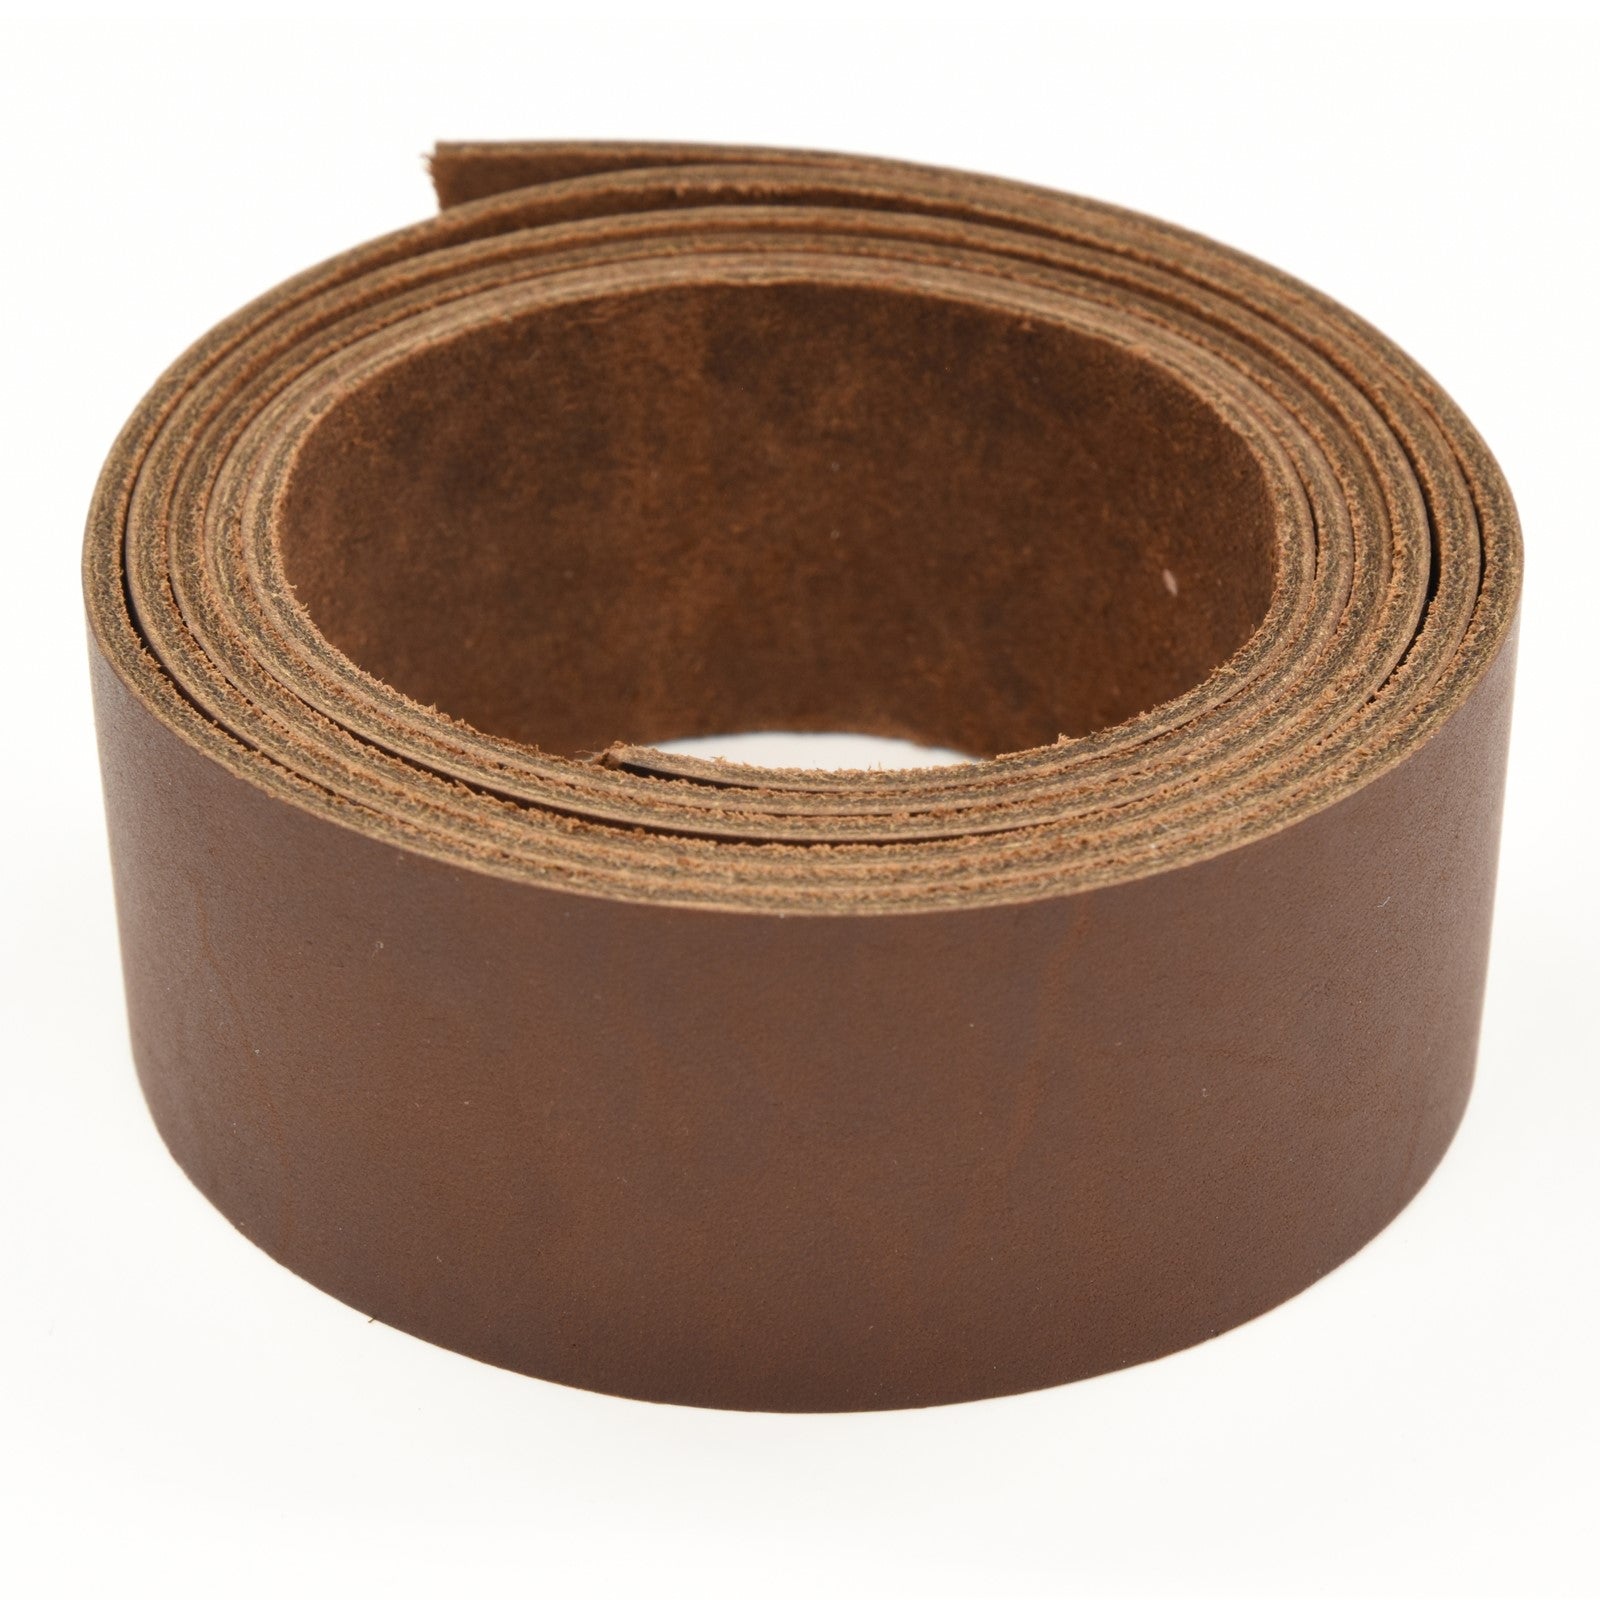 Oil Tanned Summits Edge Leather 54" Strap Various Colors and Widths 4-6 oz, Sugar Loaf Dark Brown / 1 1/2 | The Leather Guy